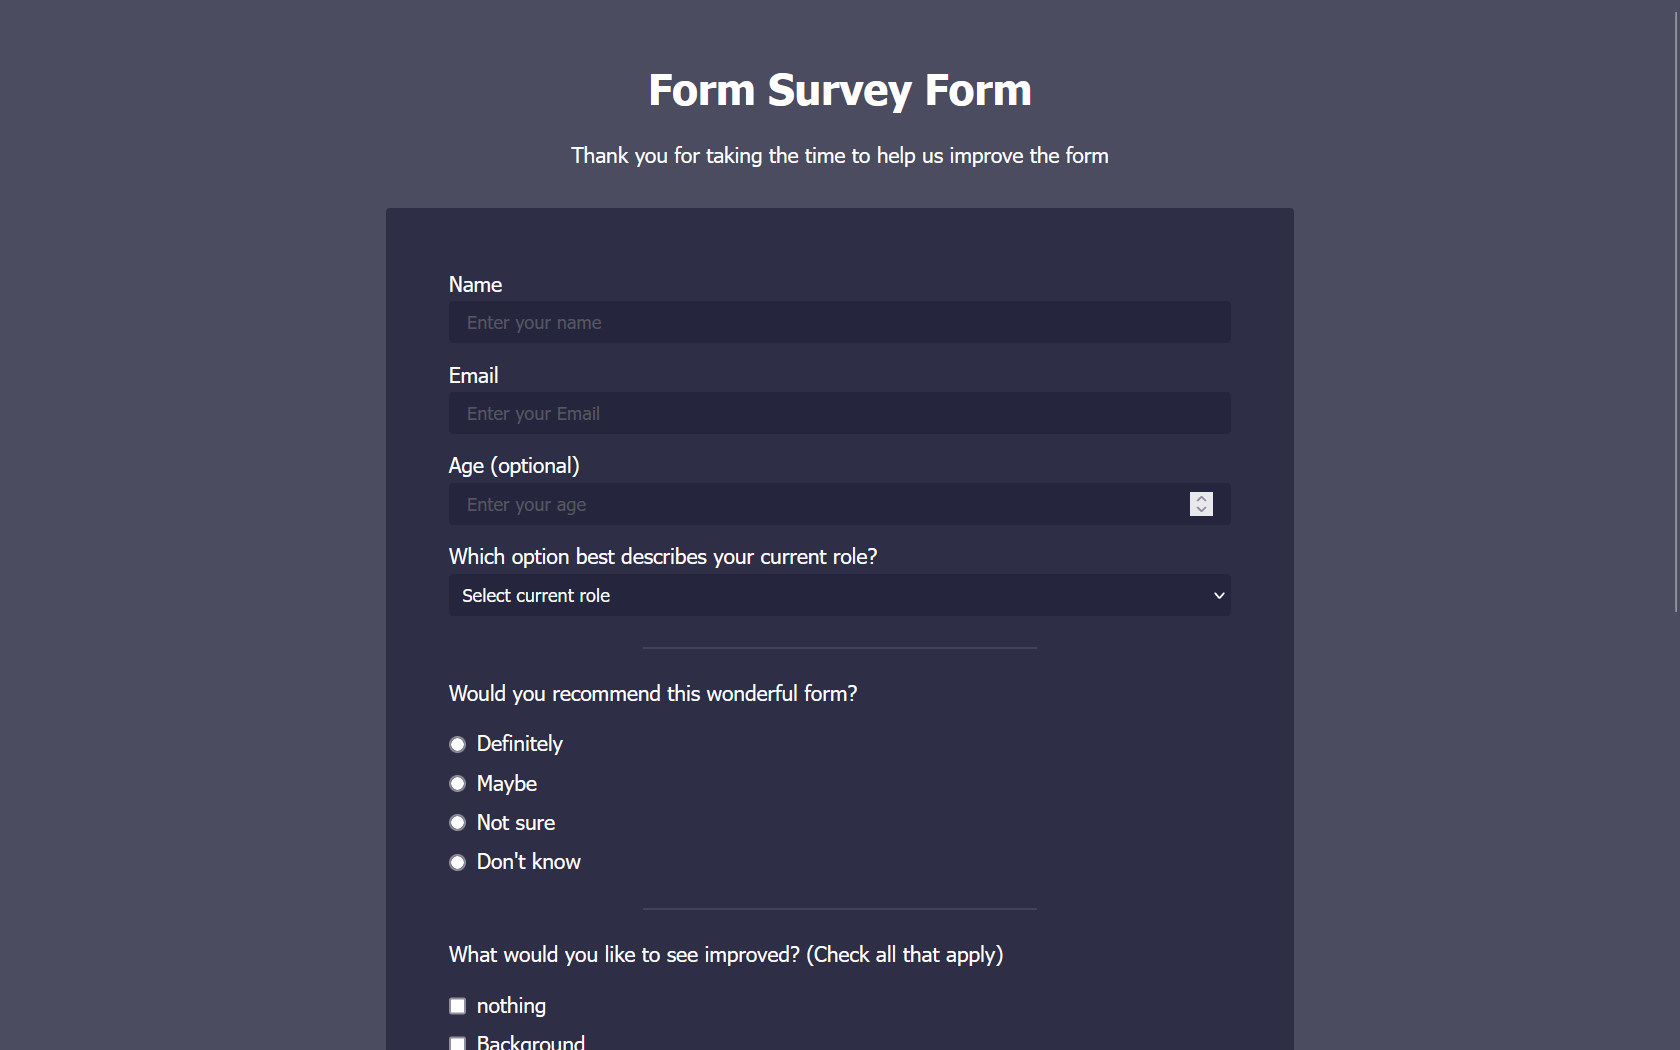 One of the best survey form in the world, handmade.